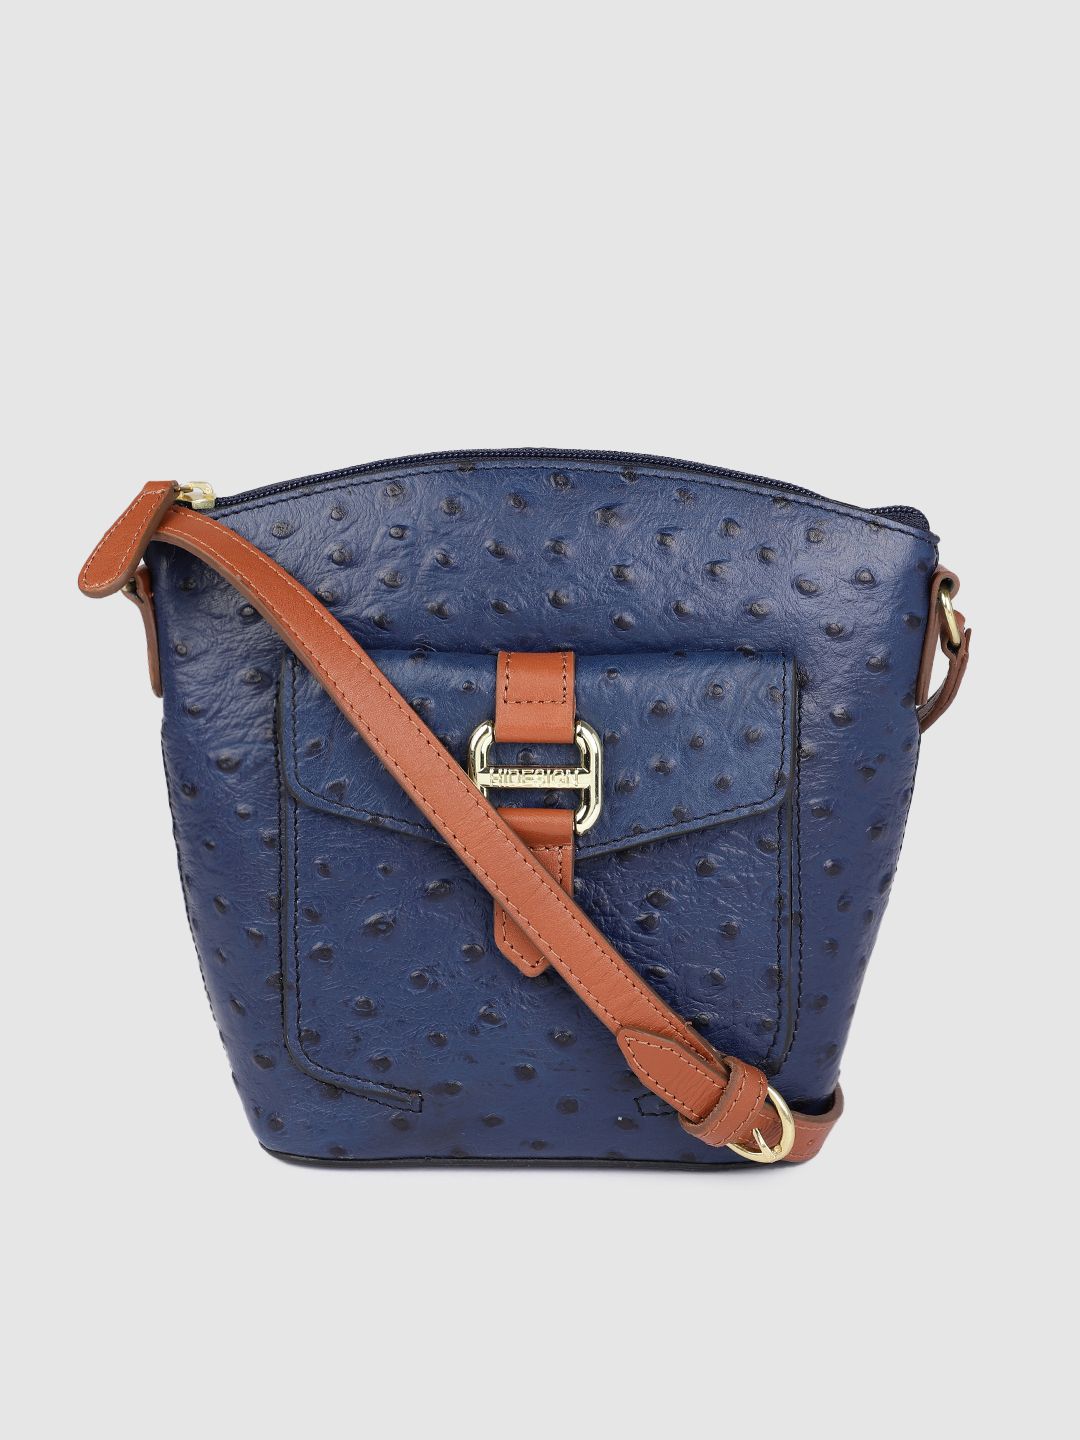 Hidesign Blue Textured Leather Sling Bag Price in India